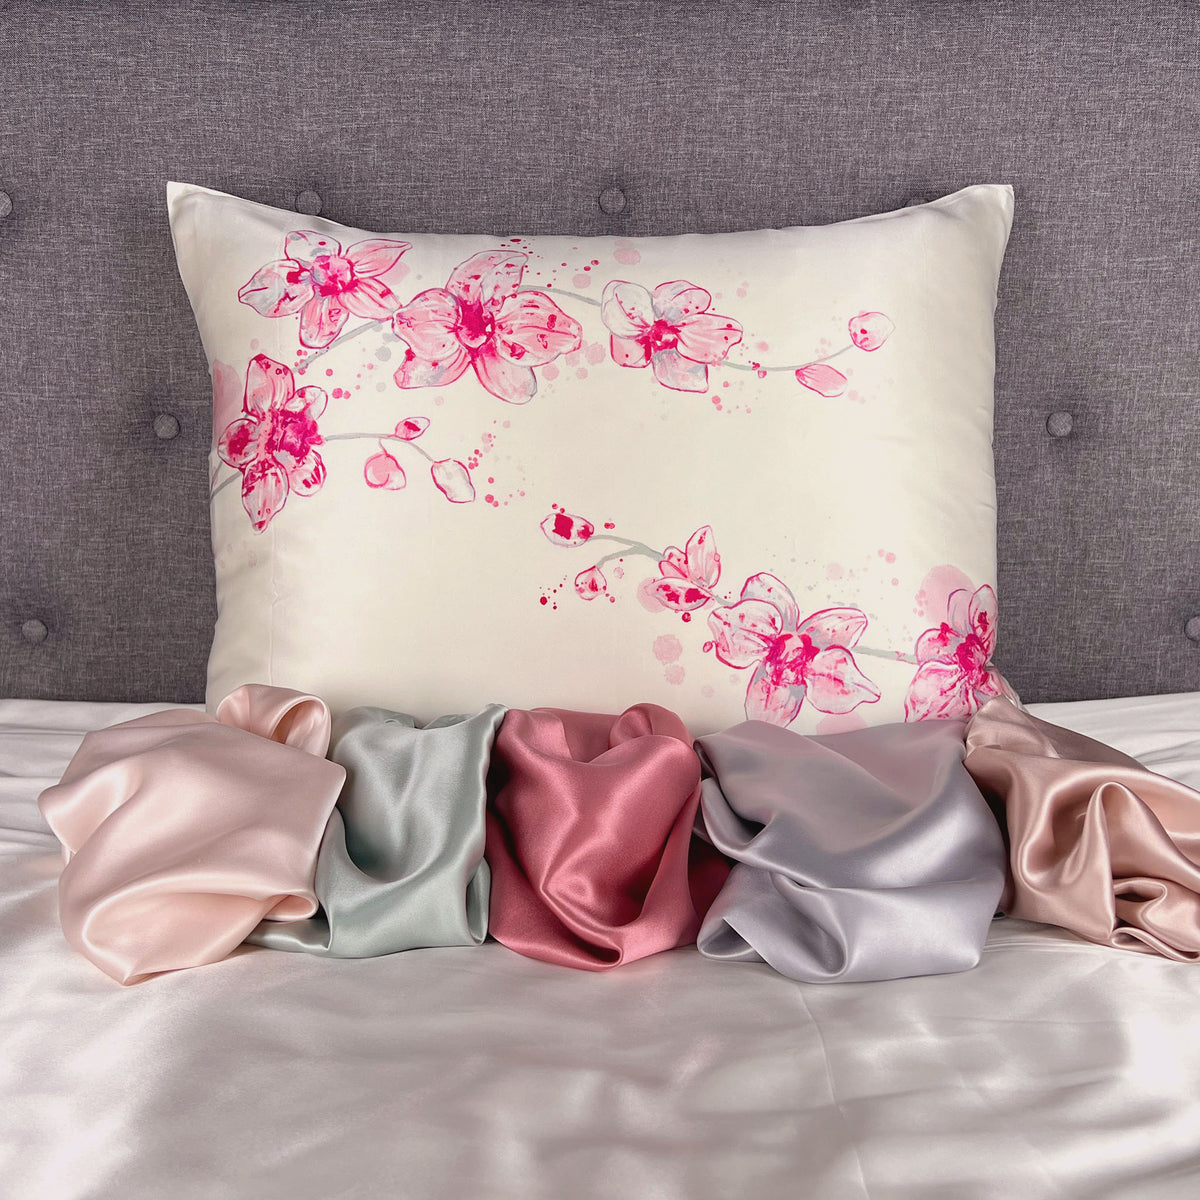 Gallery Collection Silk Pillowcases - Pink Orchids